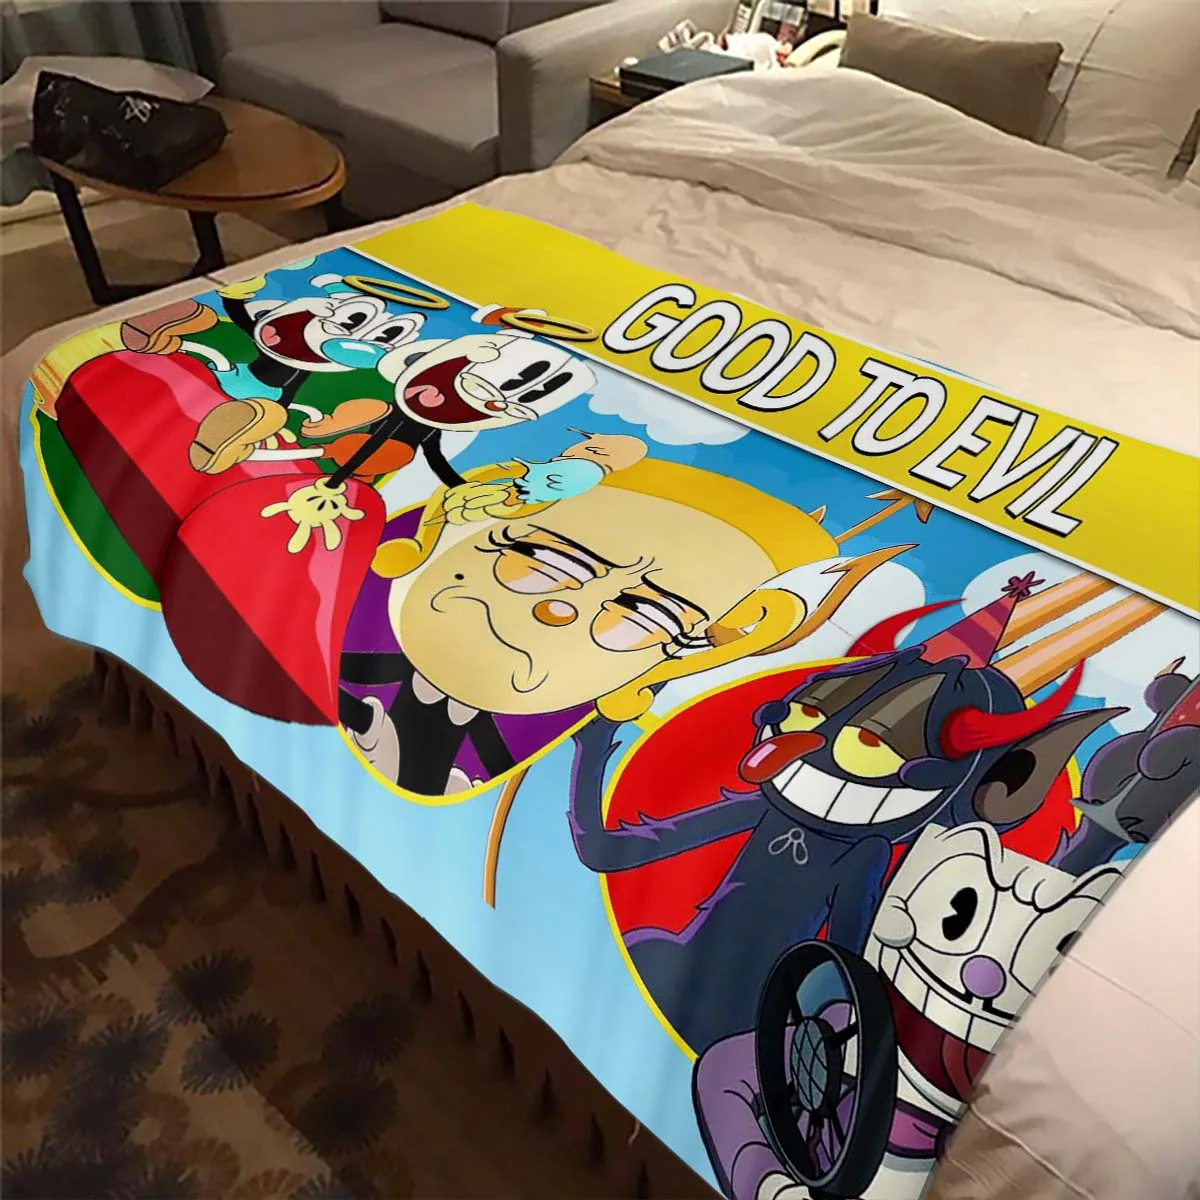 

Flannel Blanket Game Soft Fleece Blanket Bedspread Sofa Couch Camping Traveling Cover Nice Children Gift Cuphead Cartoon Printed